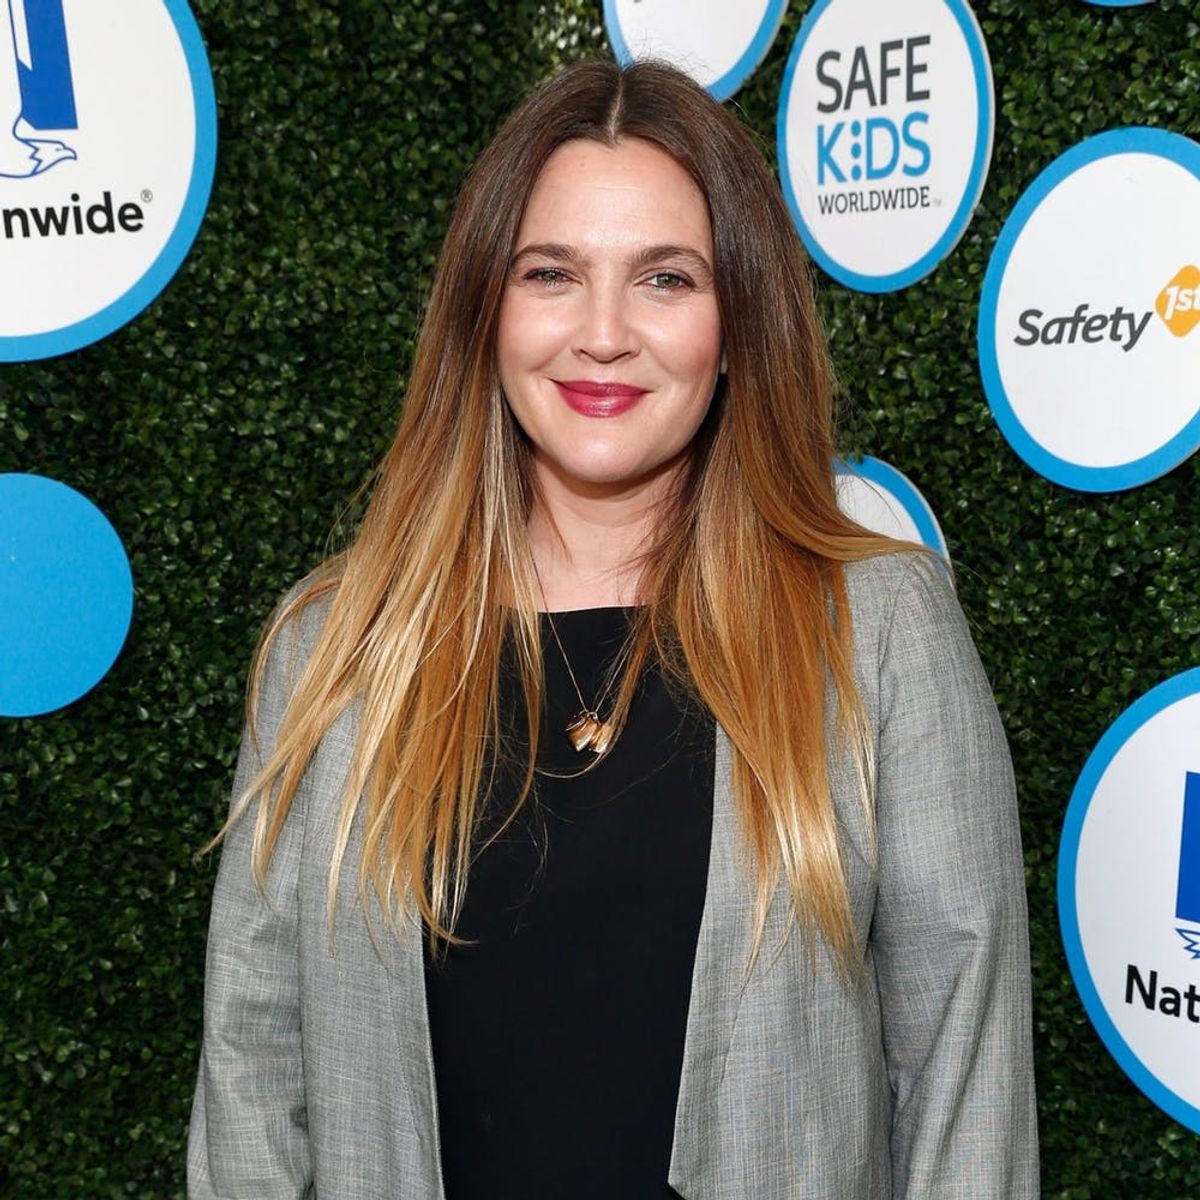 Why Drew Barrymore Might Be the Next Jenny McCarthy